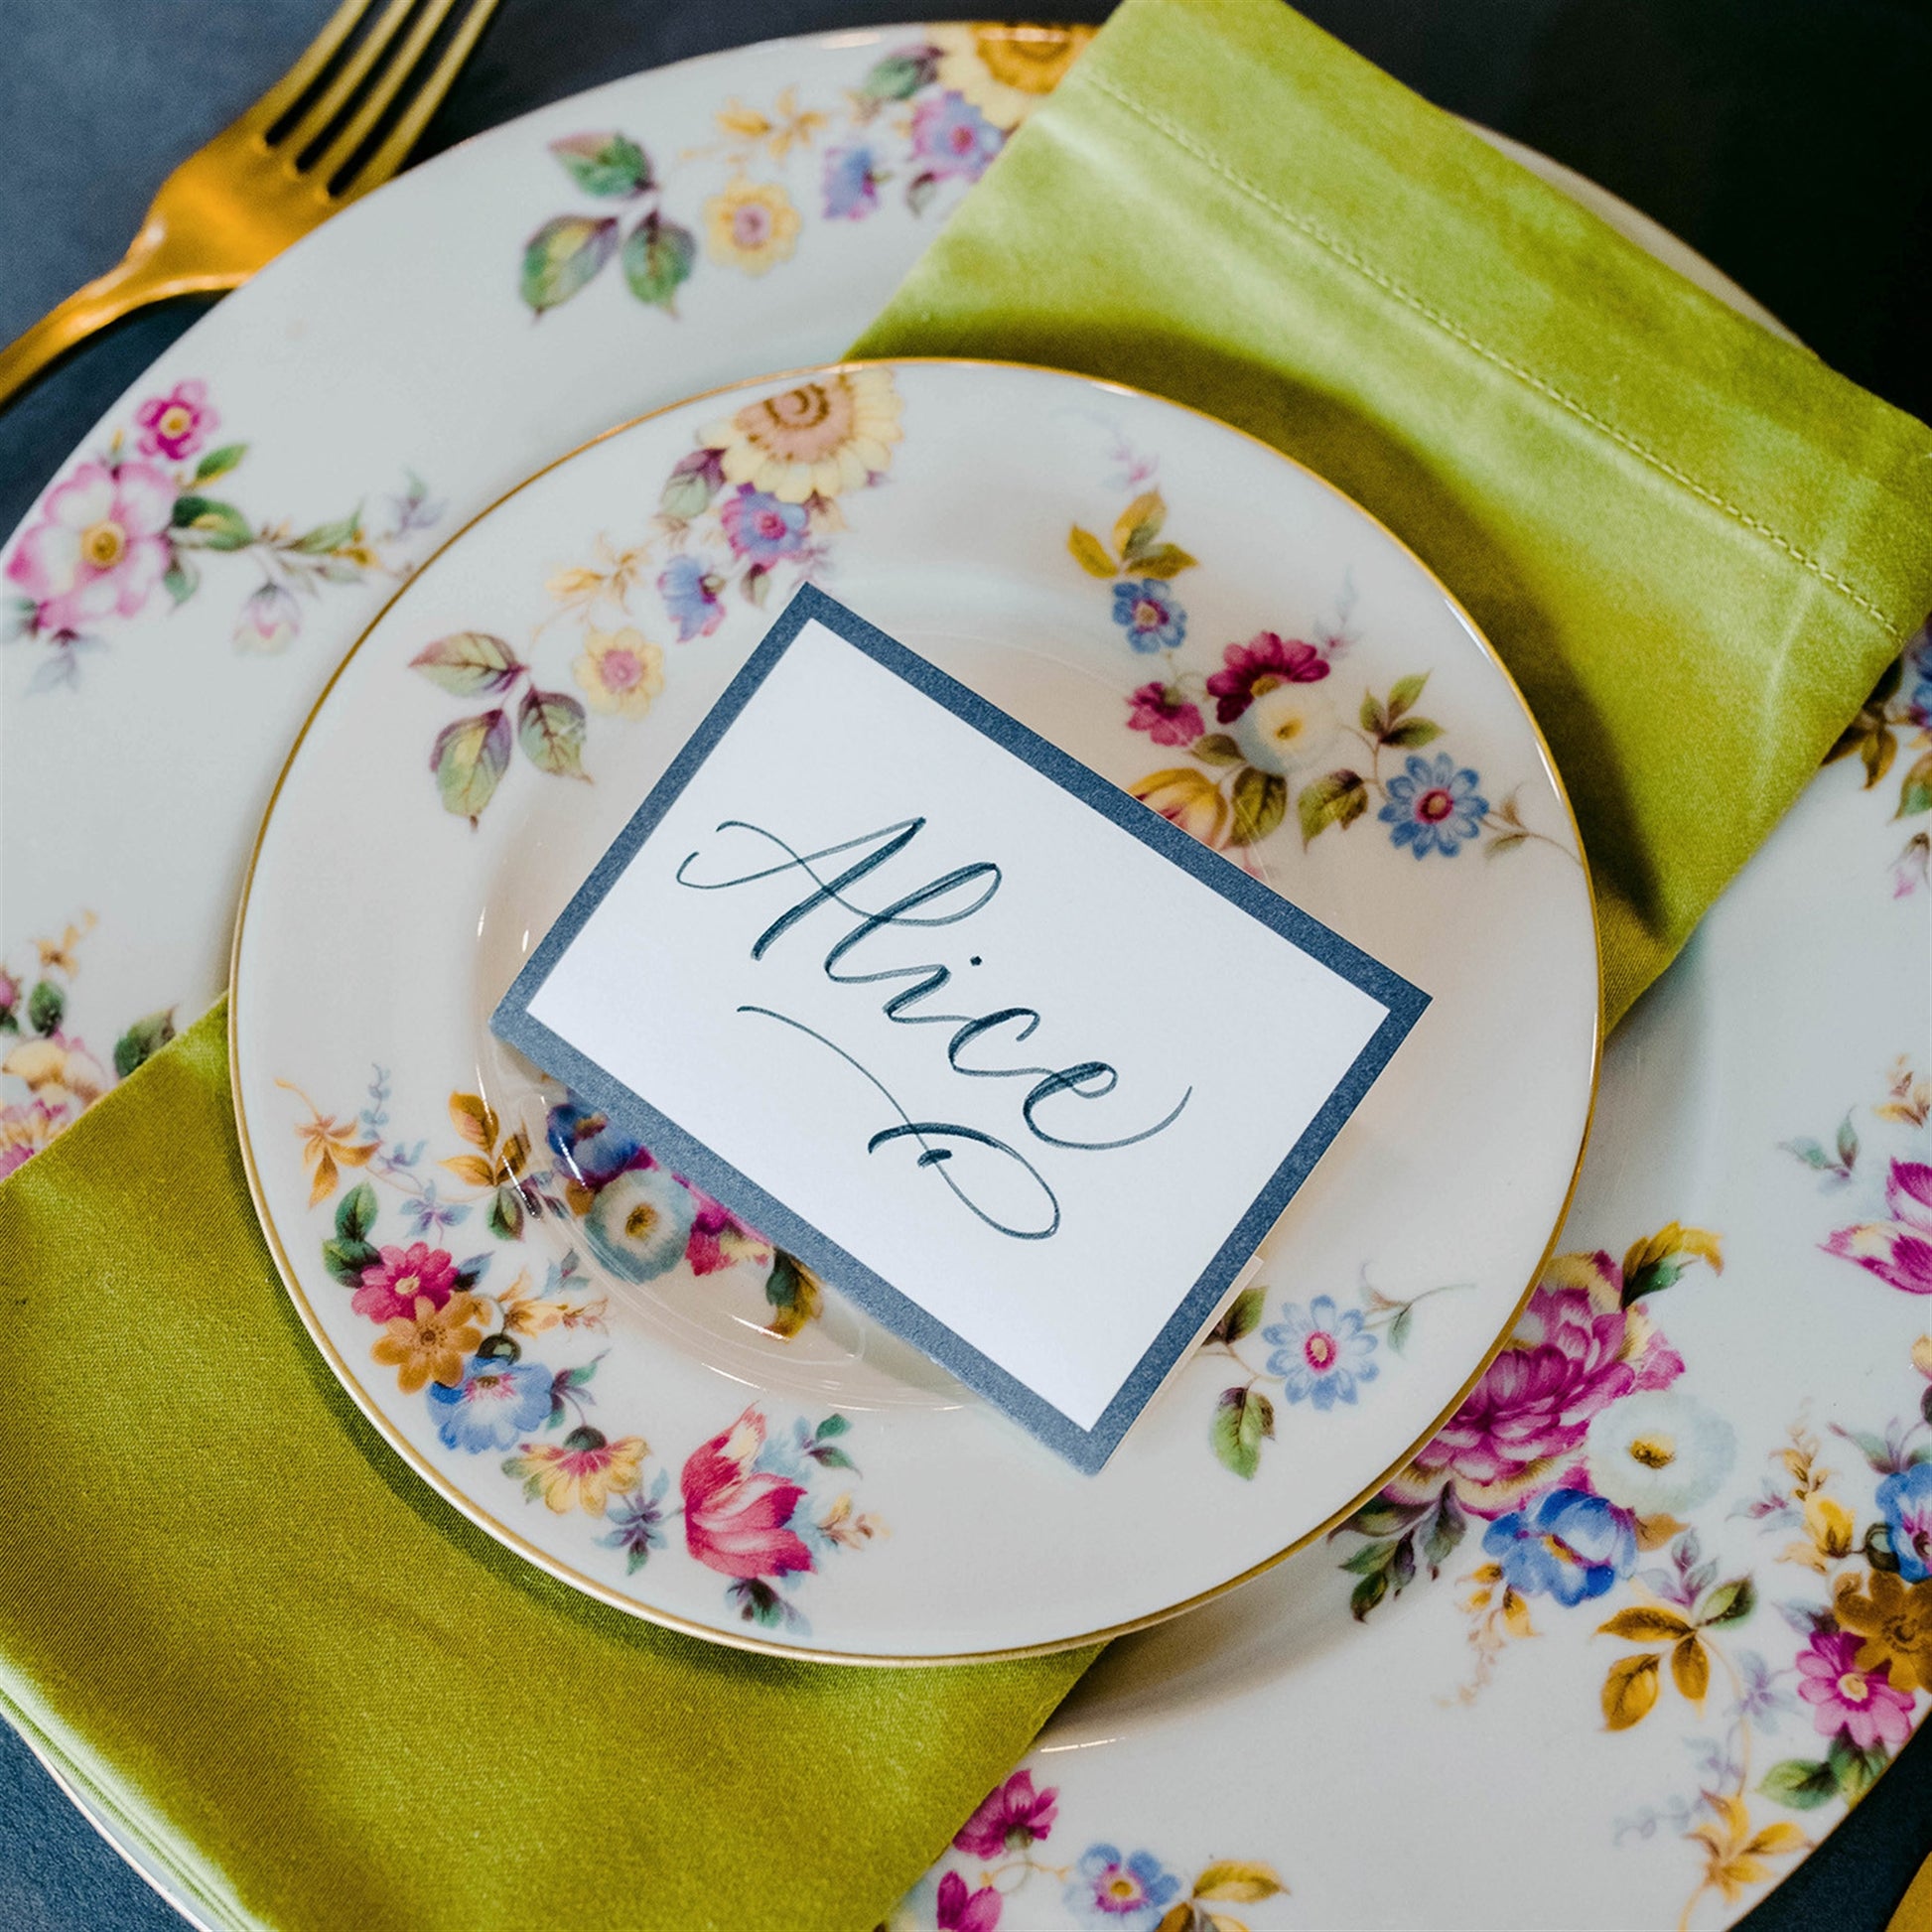 A photo of a place setting using the place card.